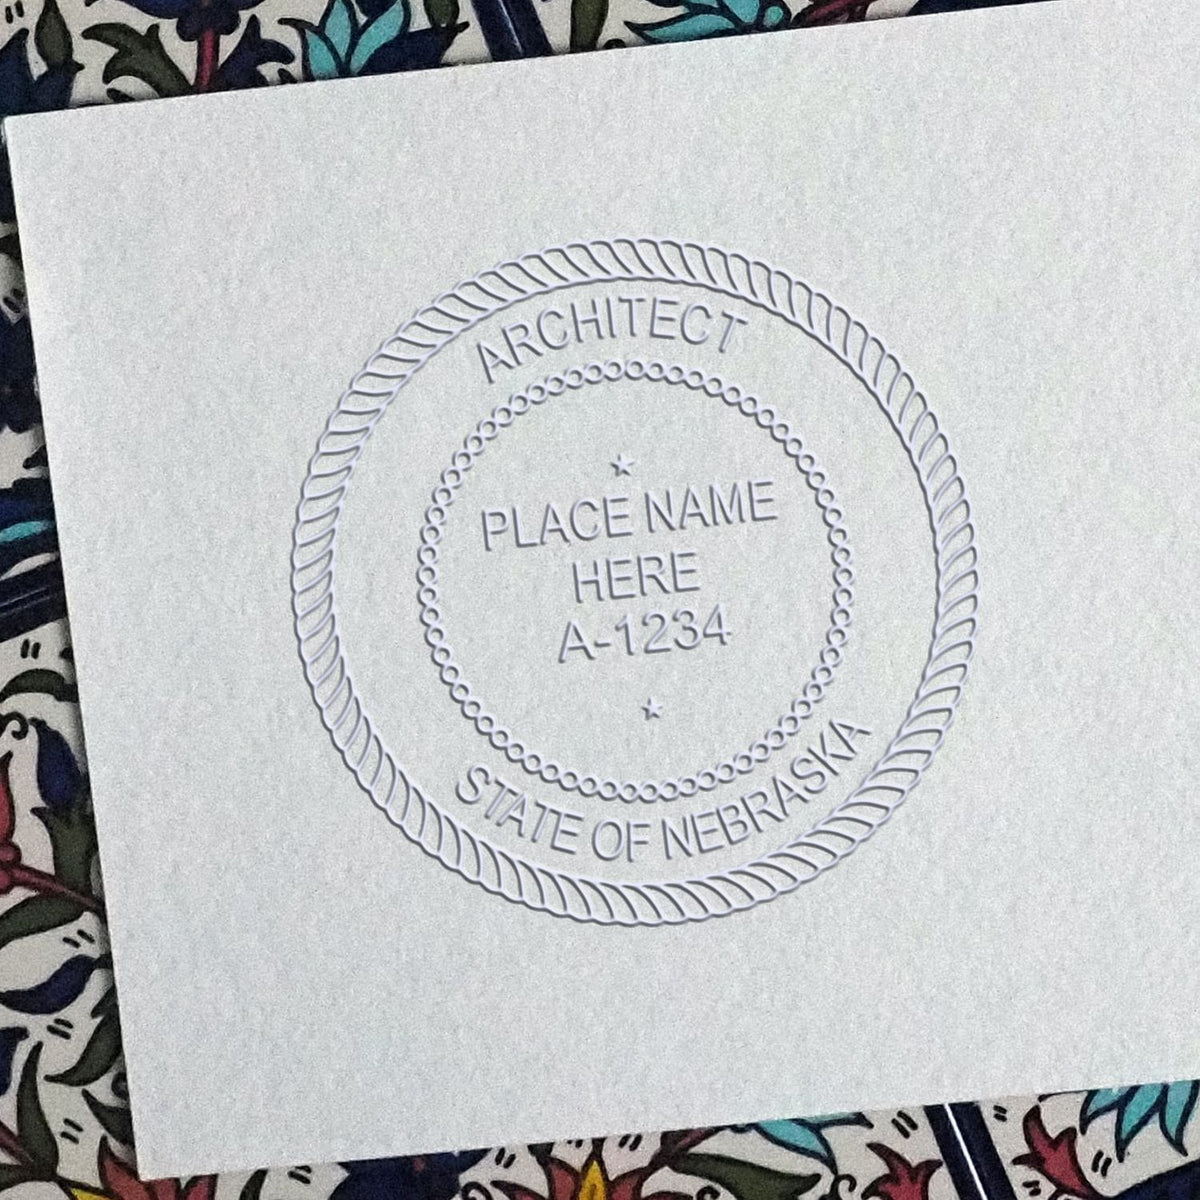 The Gift Nebraska Architect Seal stamp impression comes to life with a crisp, detailed image stamped on paper - showcasing true professional quality.